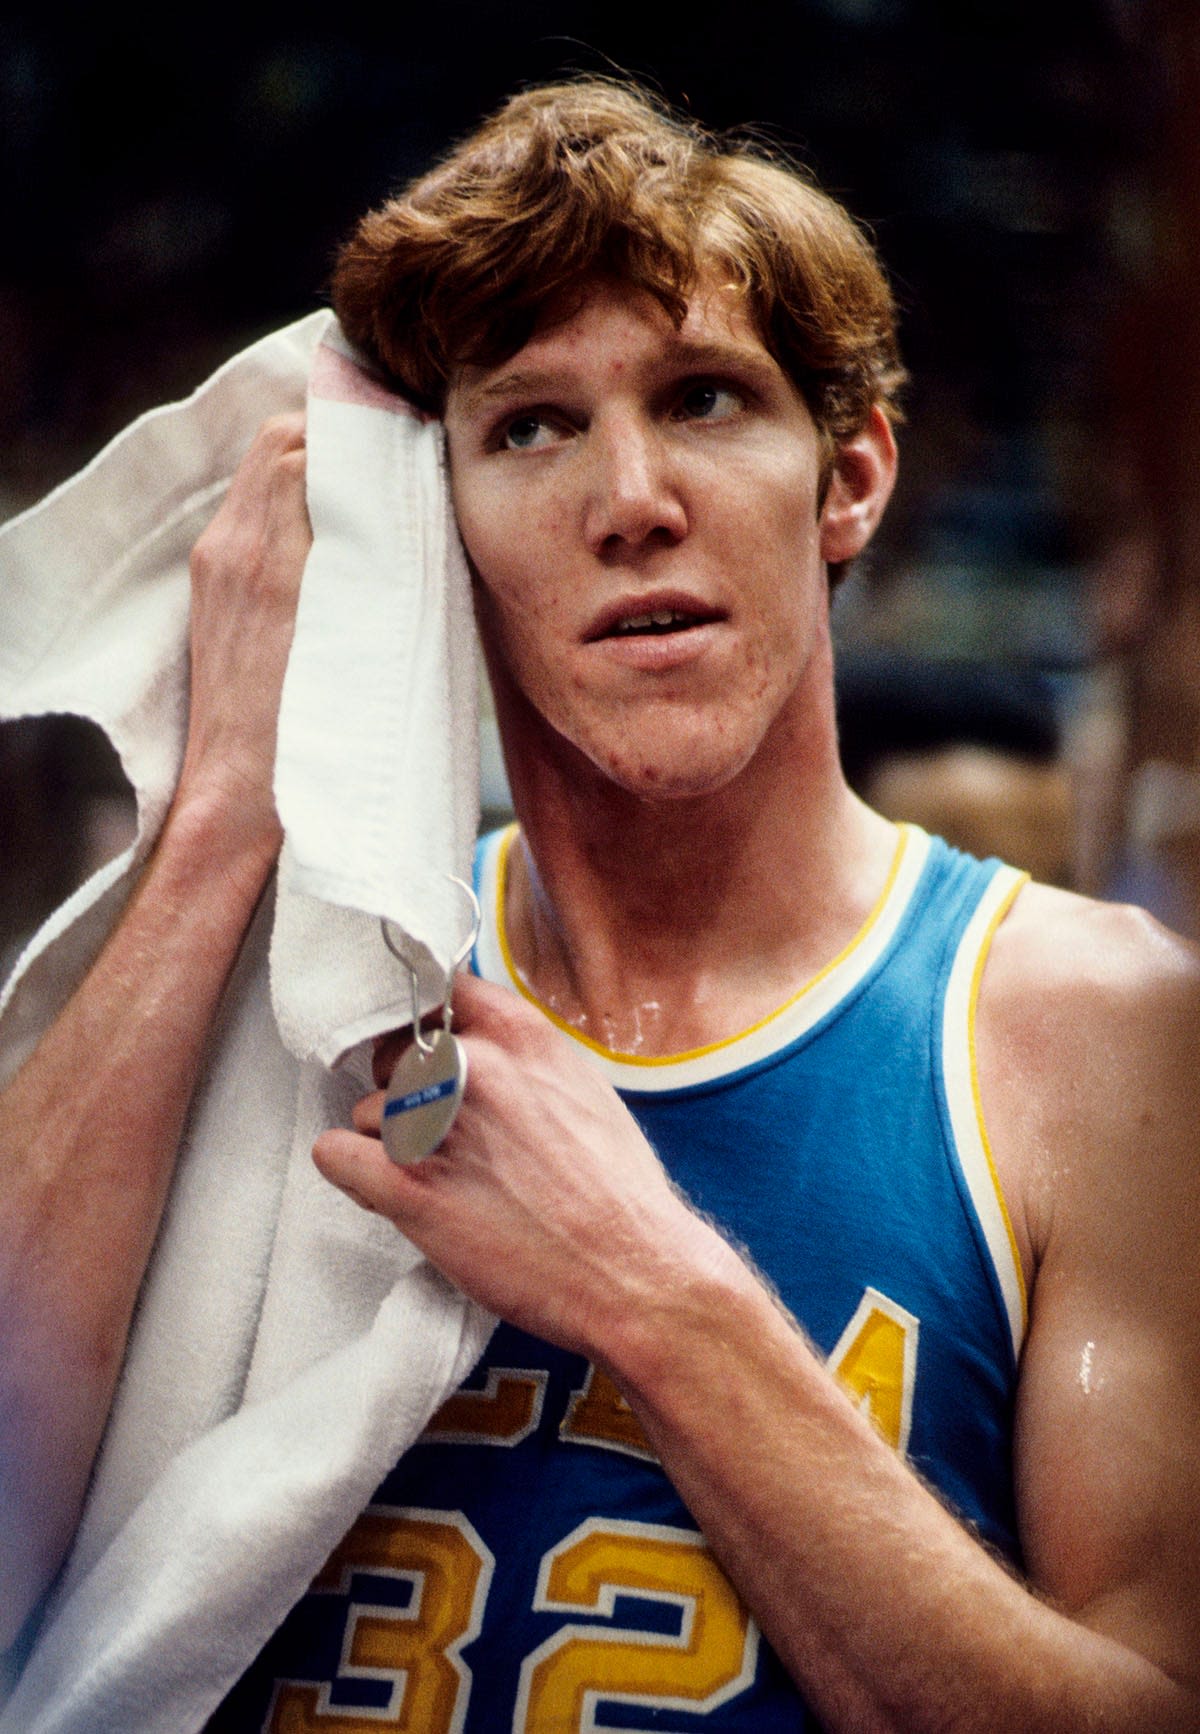 Bill Walton and UCLA faced Ohio State men's basketball once. Here's how he did